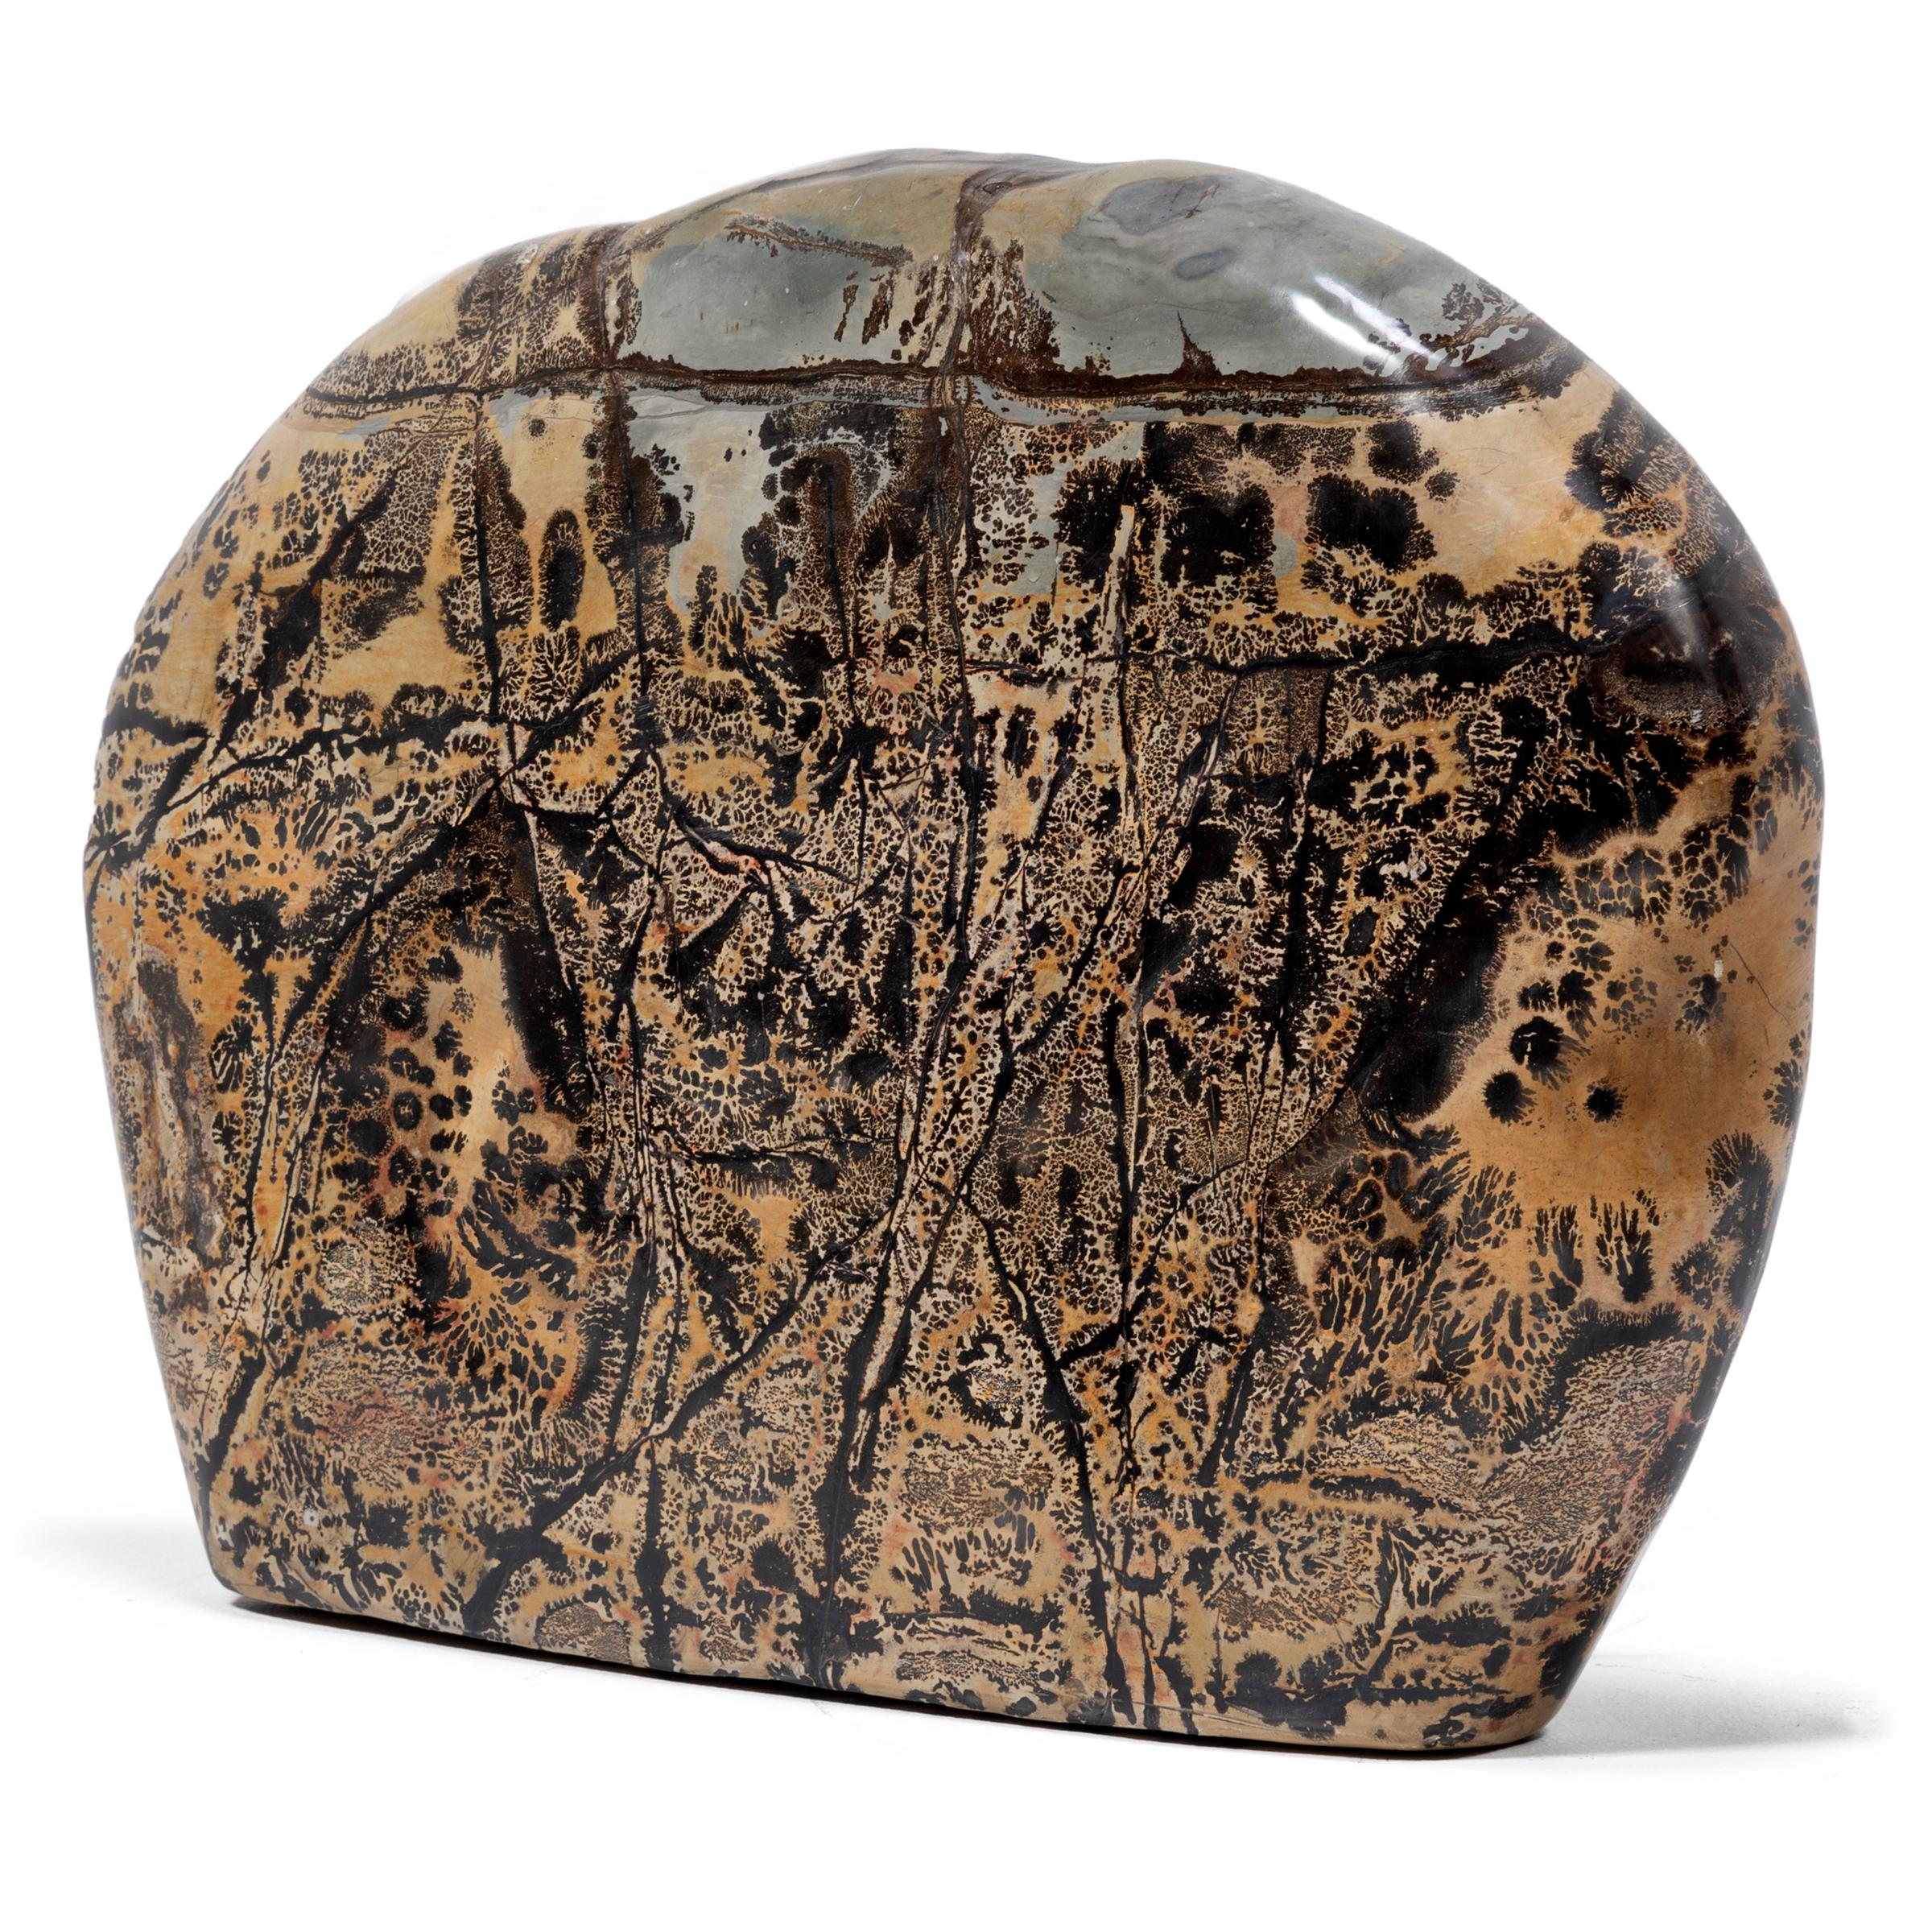 As if brushed with ink and inscribed with intricate calligraphy, this polished painting stone from Guangxi province is marked with swirling patterns of dark and light. To follow the stone's marbled coloring and natural veining can be deeply